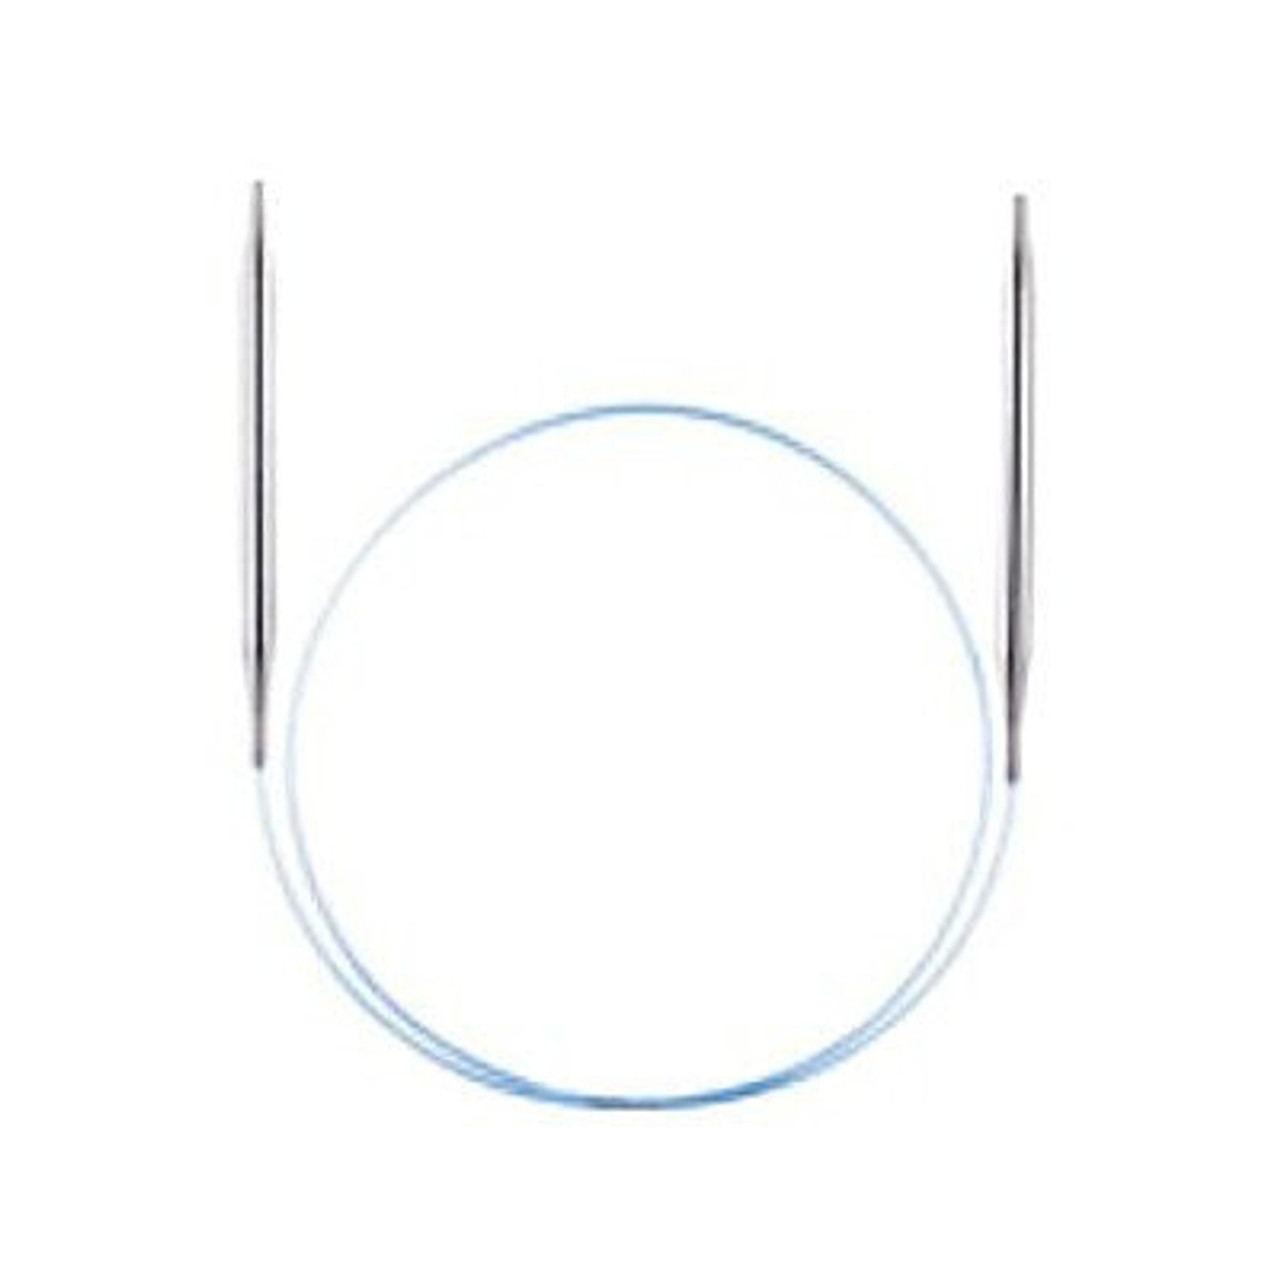 Addi Turbo Circular Knitting Needles 12 Inch Size 9 - The Websters